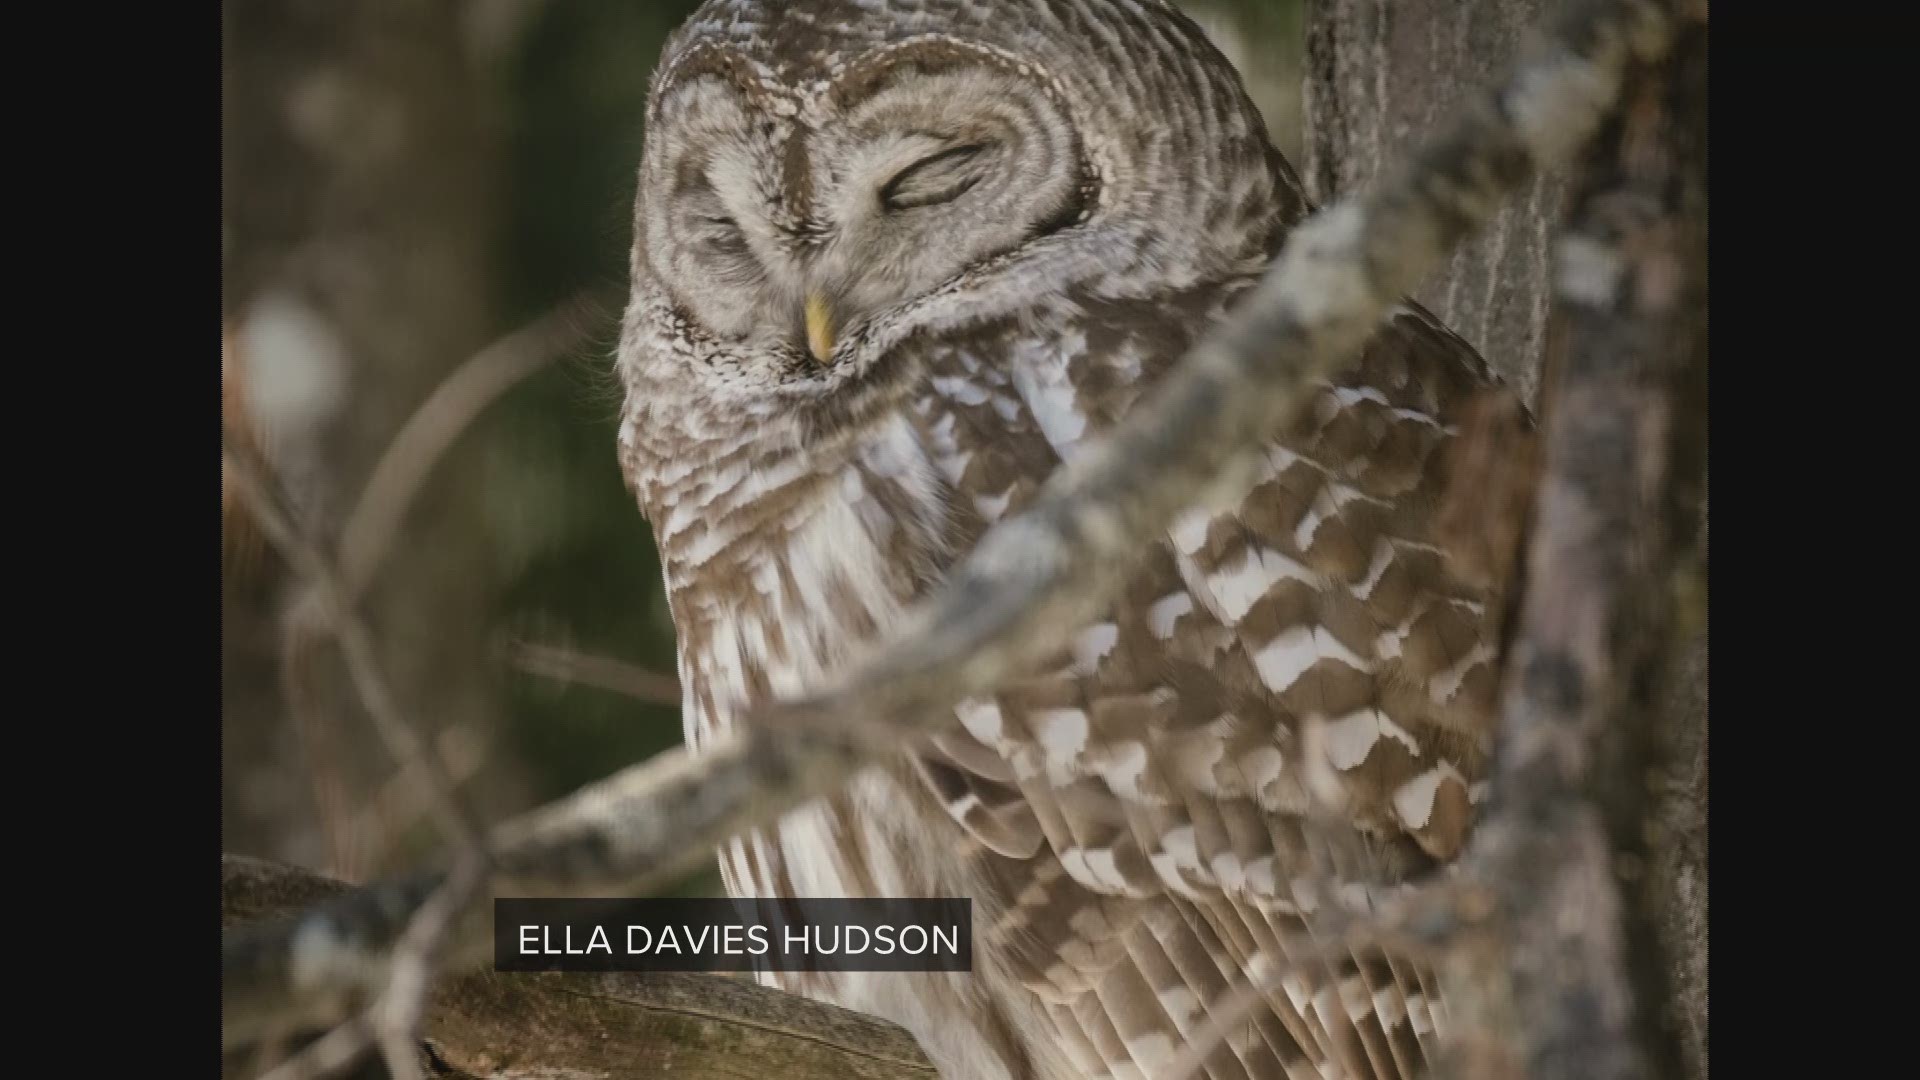 All across Maine people are seeing Barred Owls more than ever before. Local experts say last year's increase in squirrels and rodents is the cause.